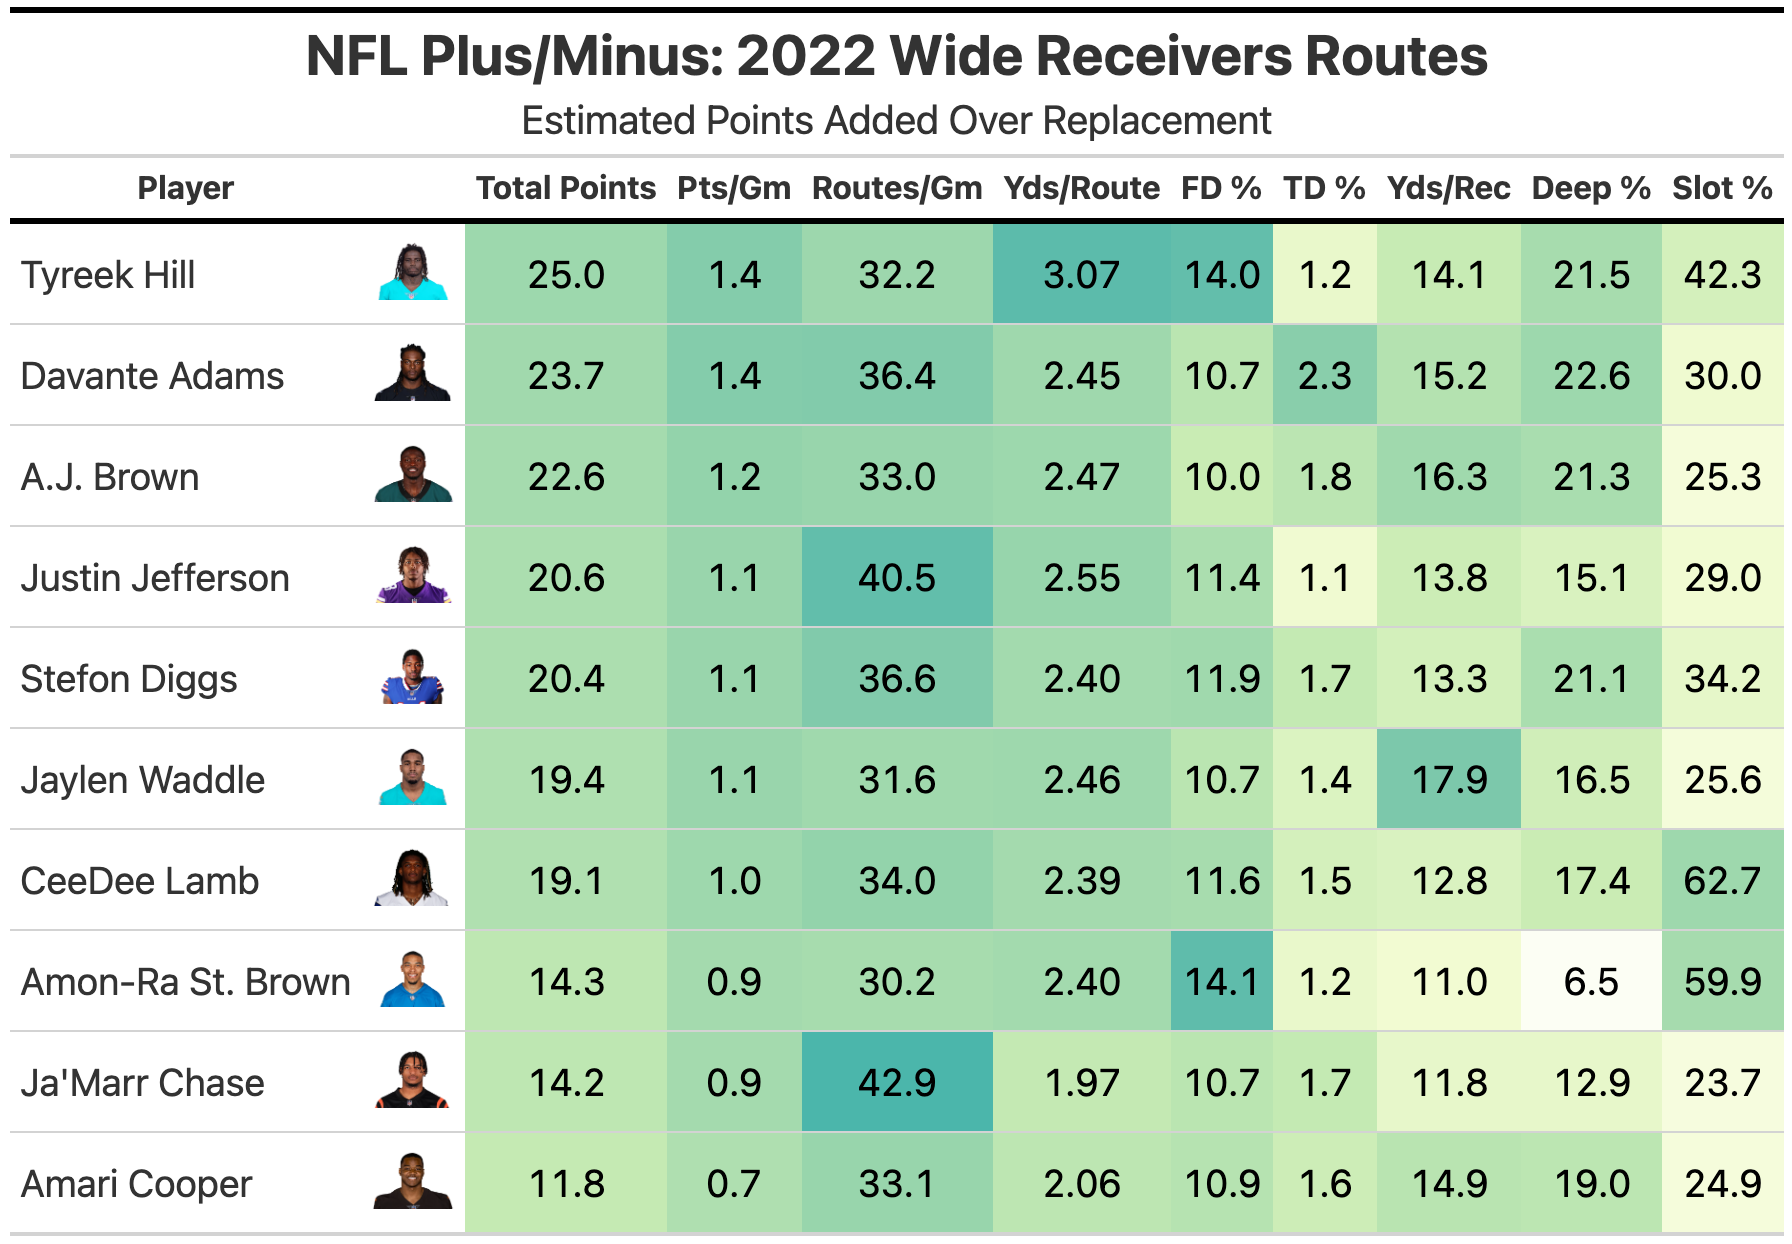 Re)Introducing NFL Plus/Minus, a Superior Player Valuation Metric